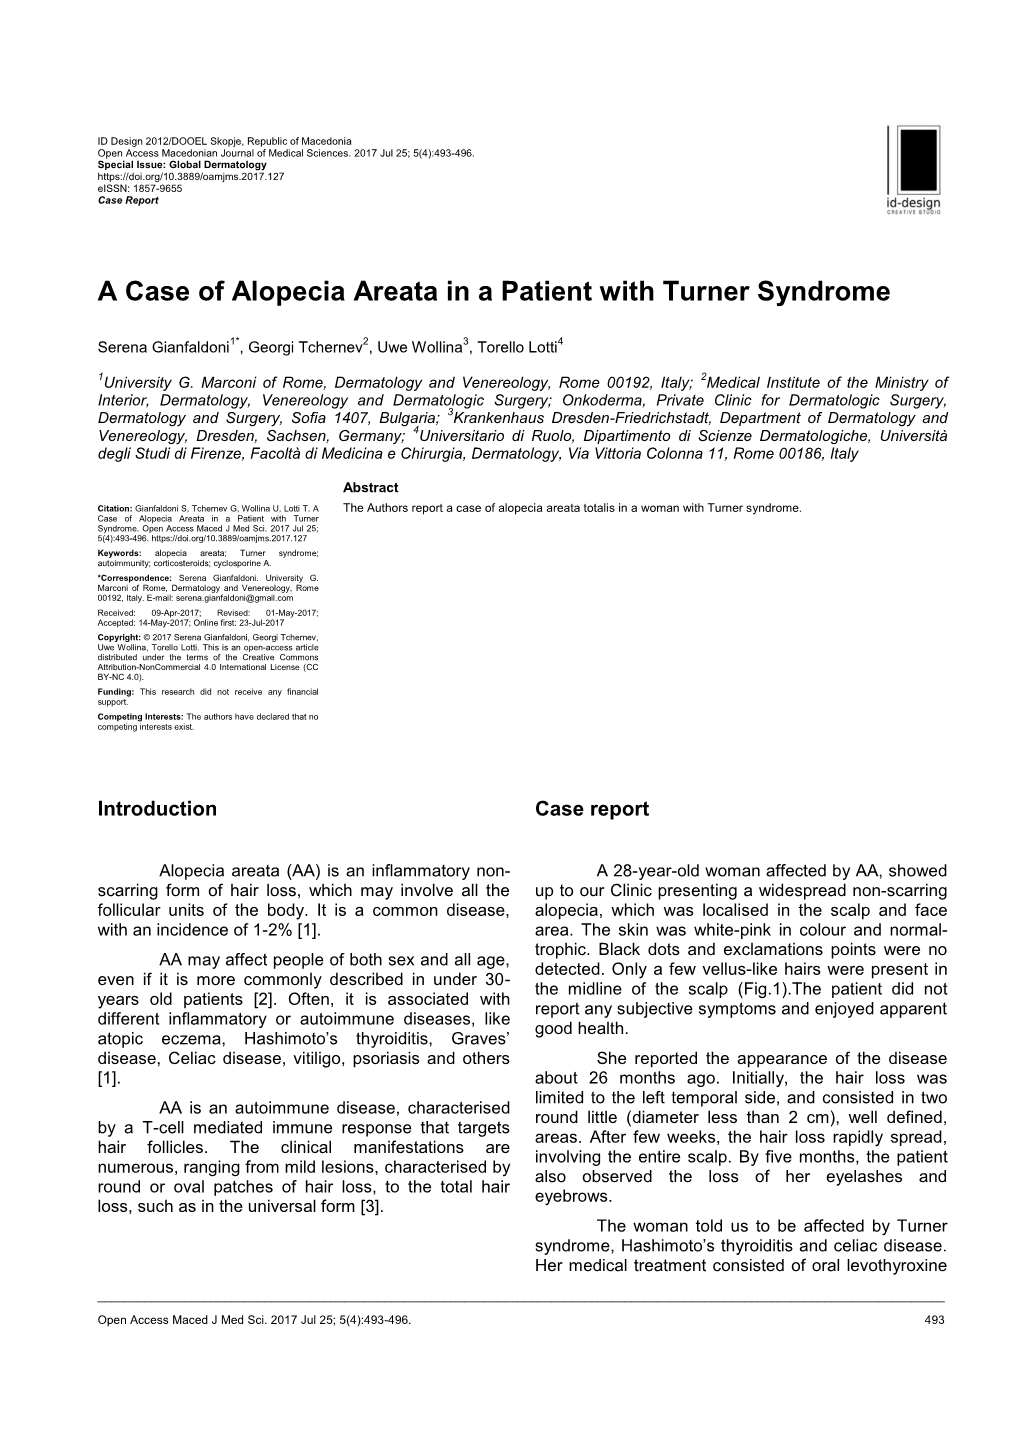 A Case of Alopecia Areata in a Patient with Turner Syndrome